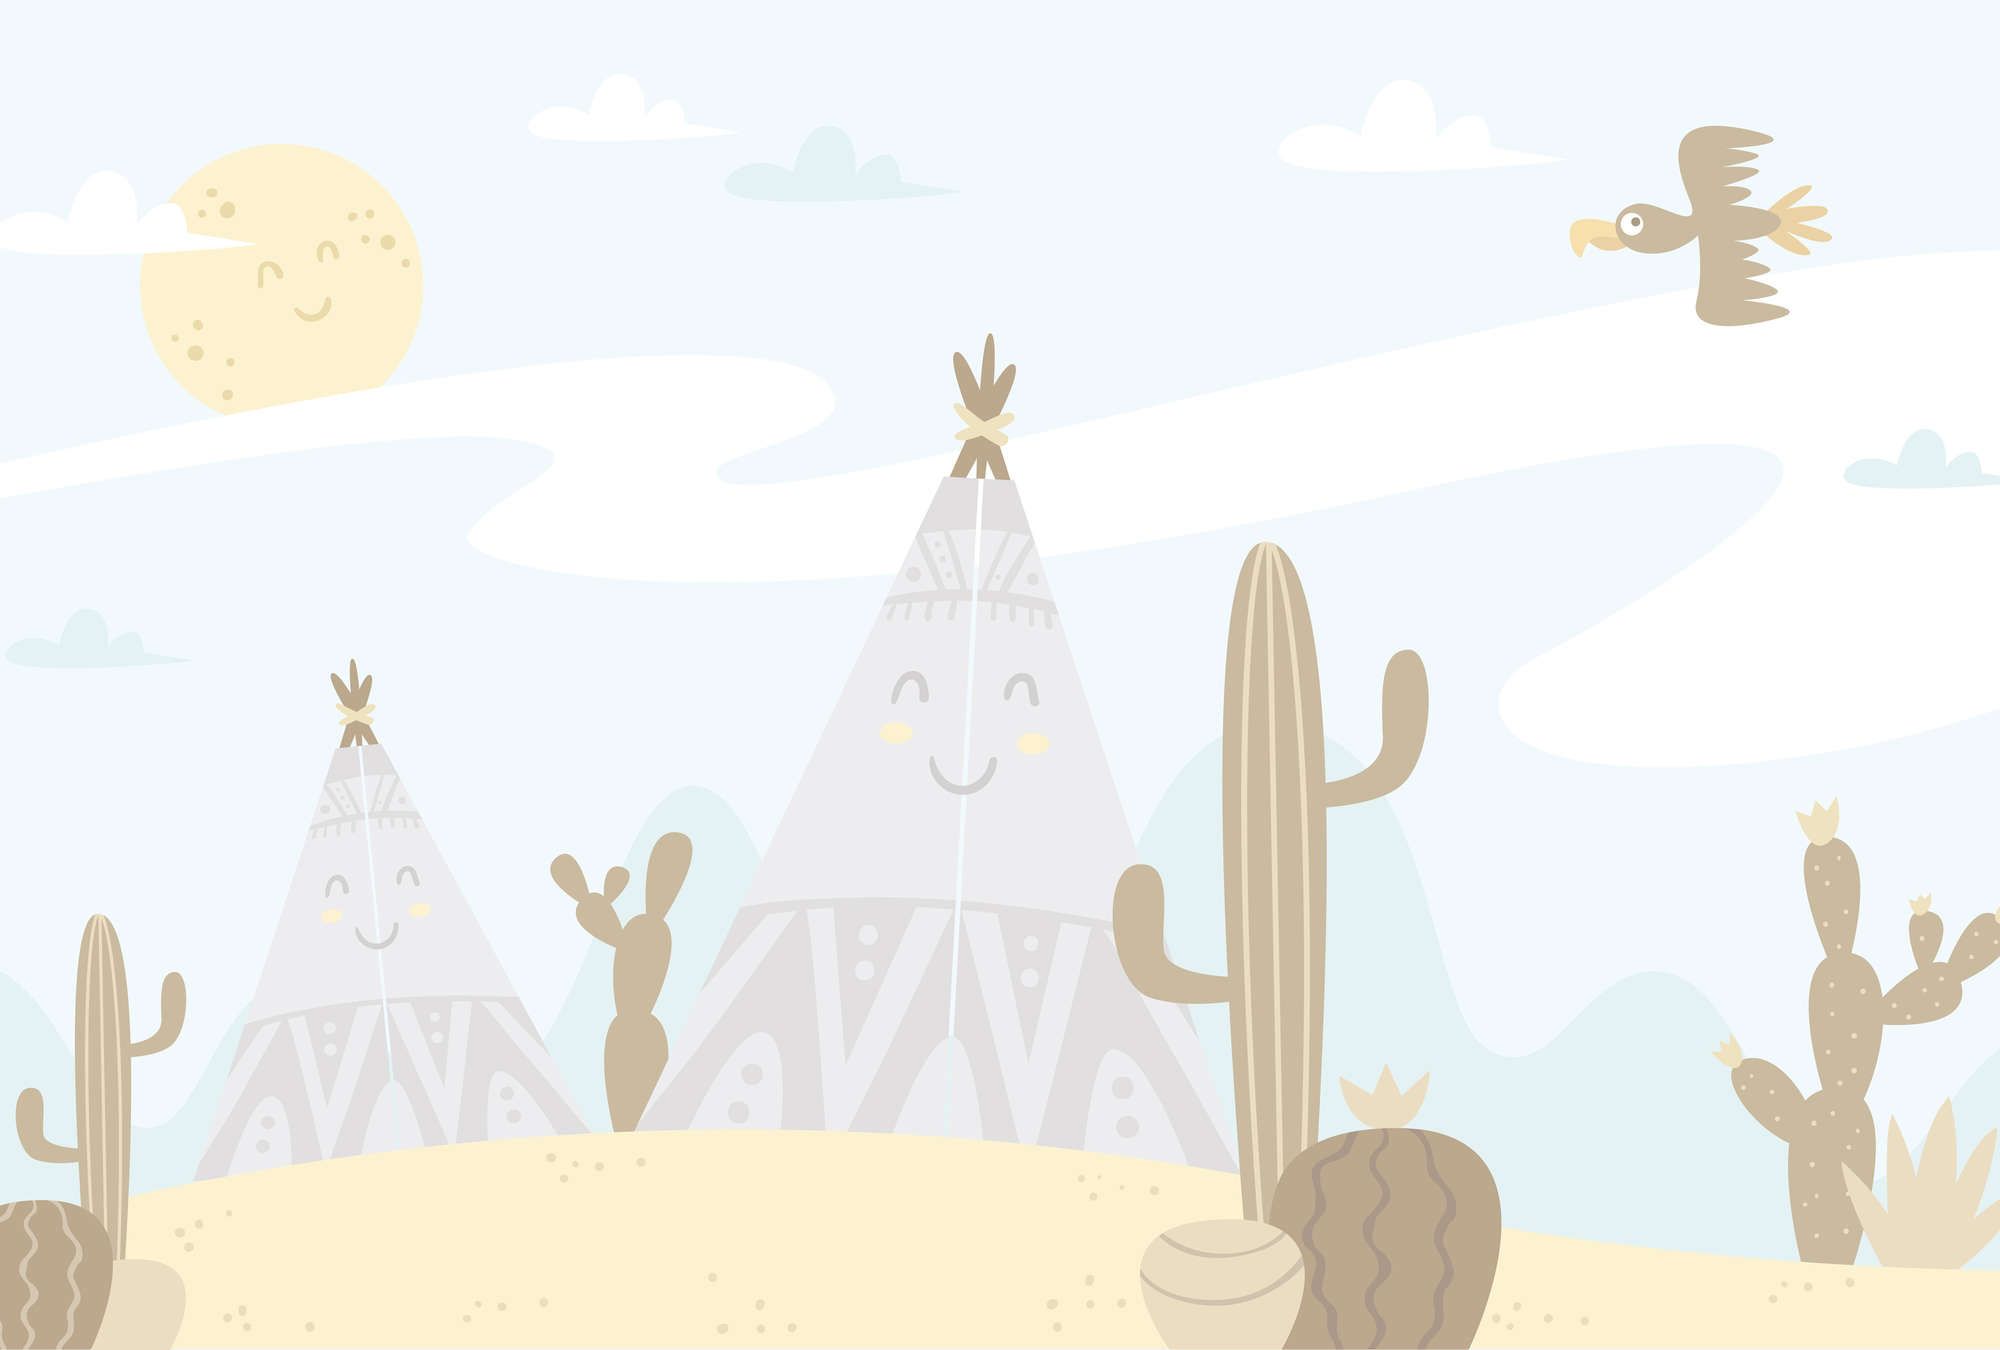             Photo wallpaper Desert Landscape with Tipis - Smooth & slightly shiny non-woven
        